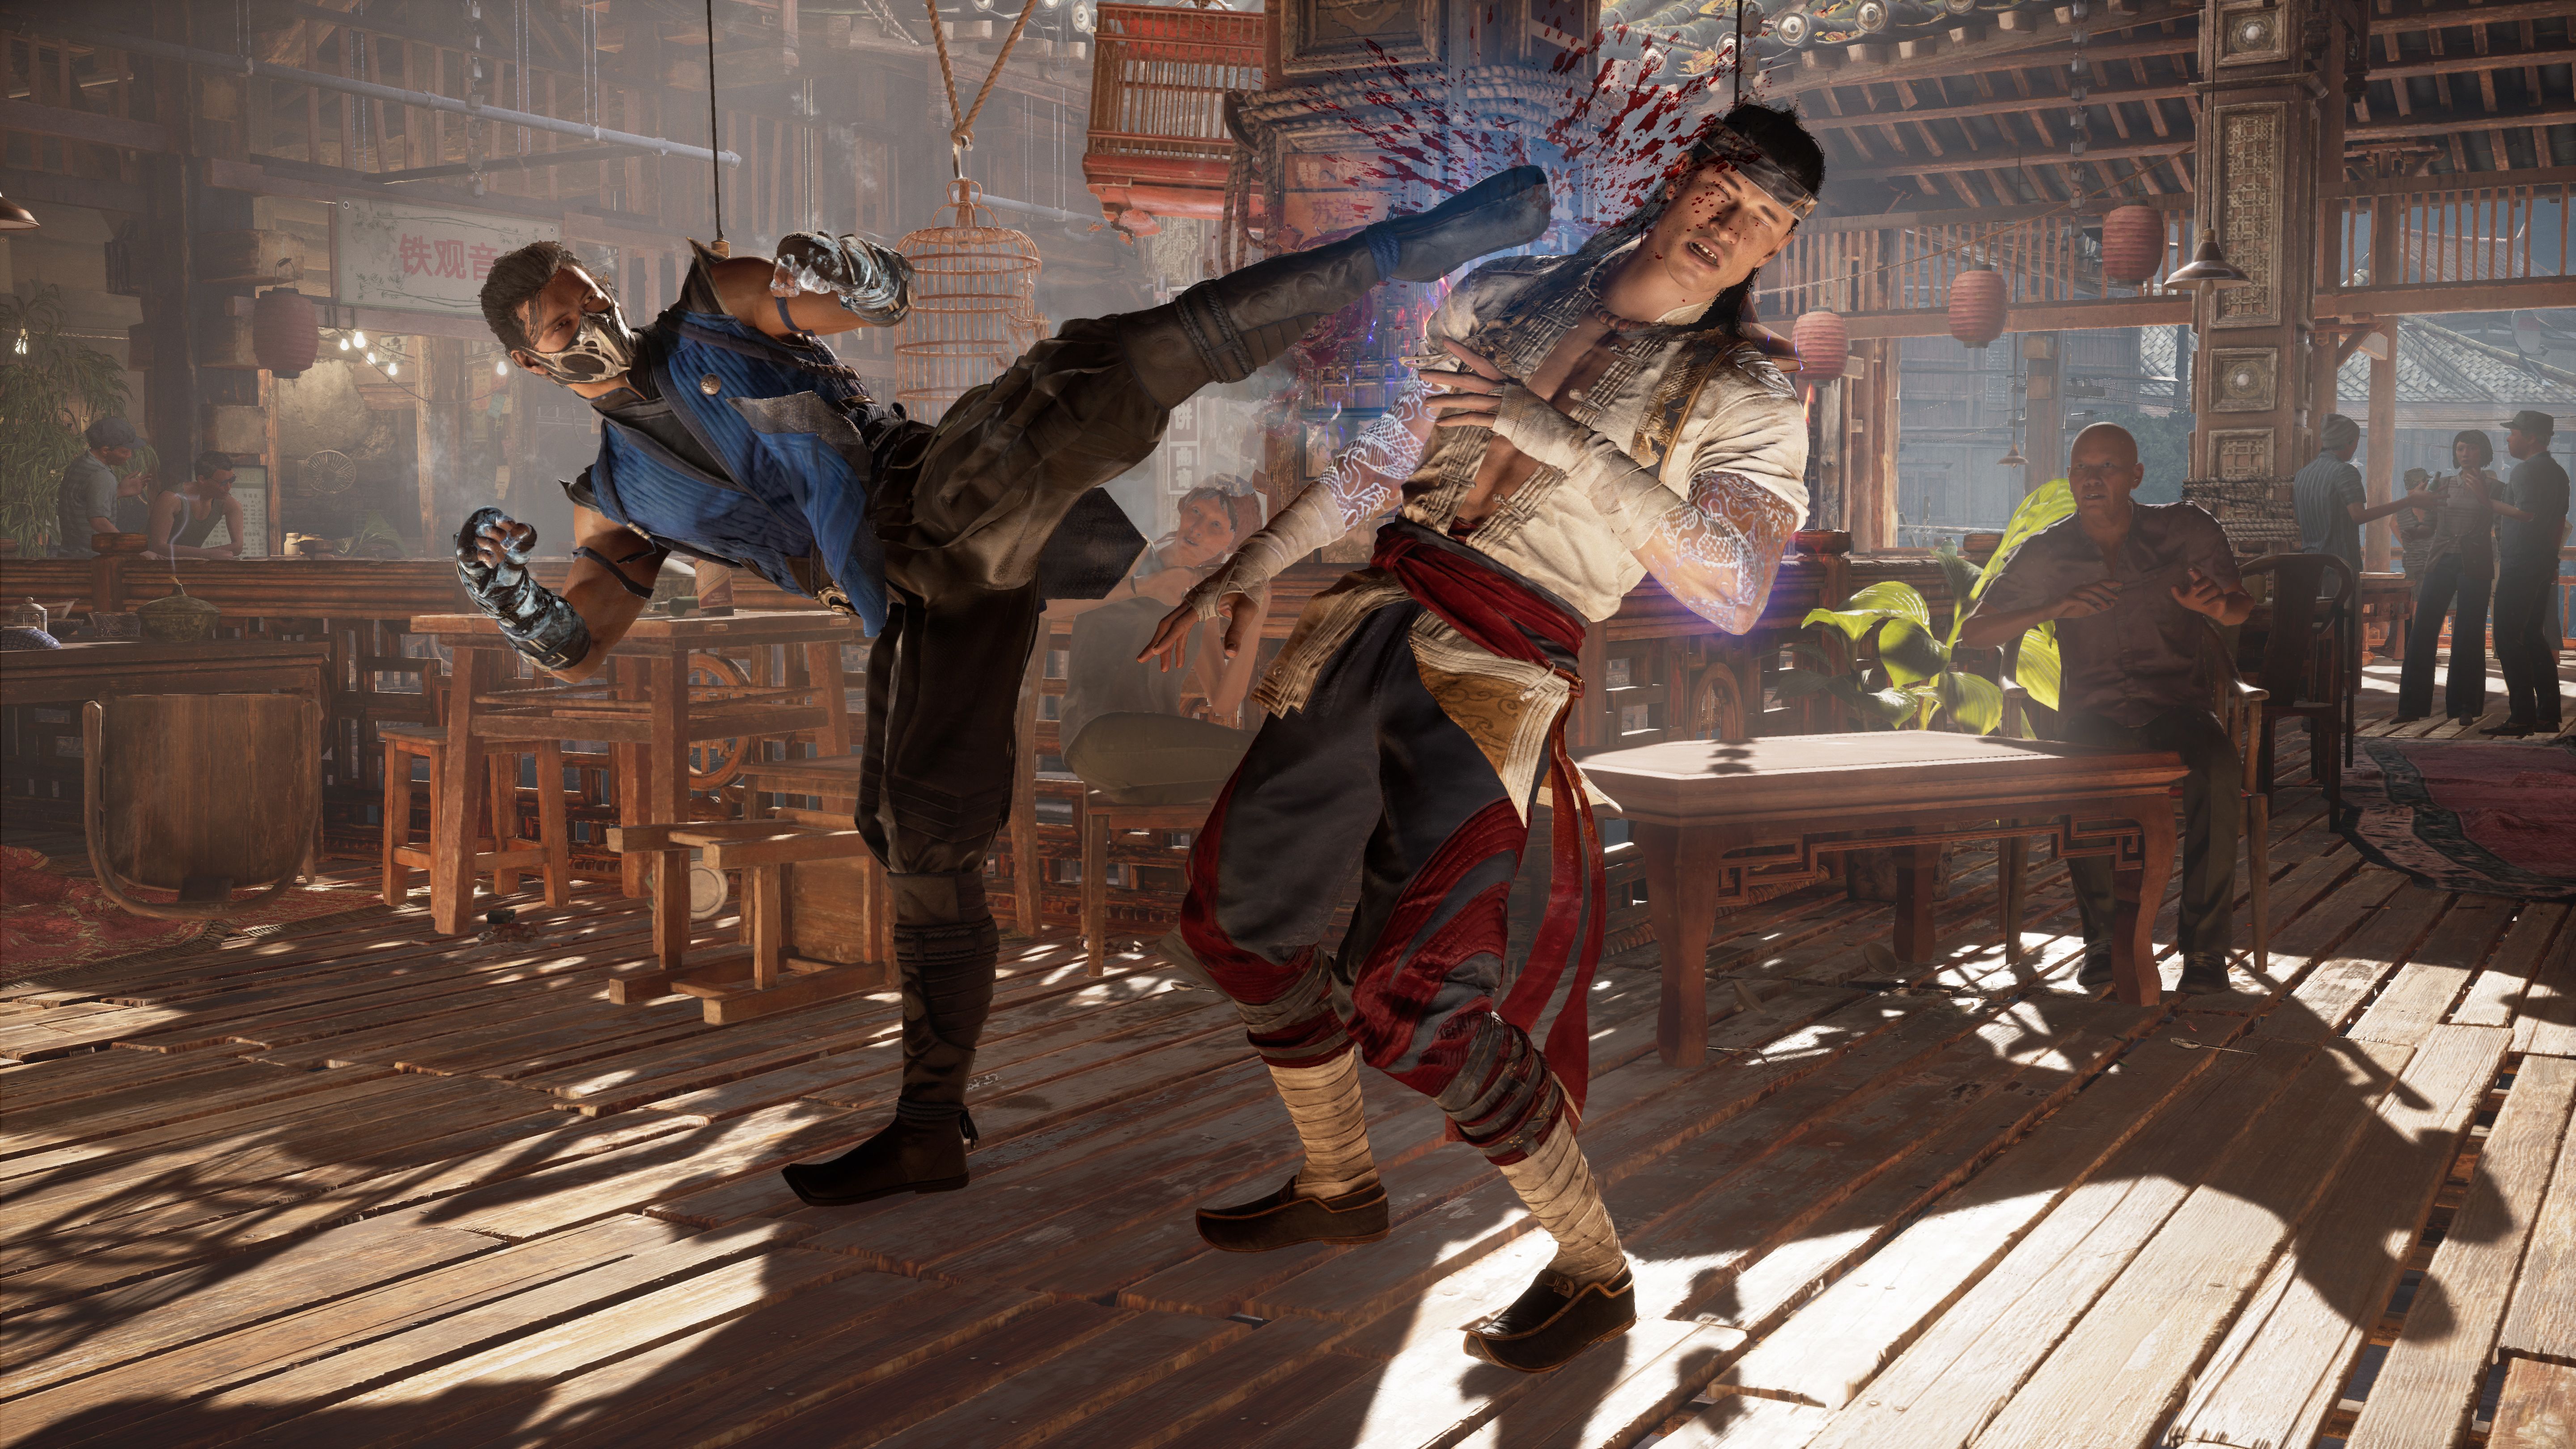 Mortal Kombat 1 Update Patch Notes and Latest Updates - News